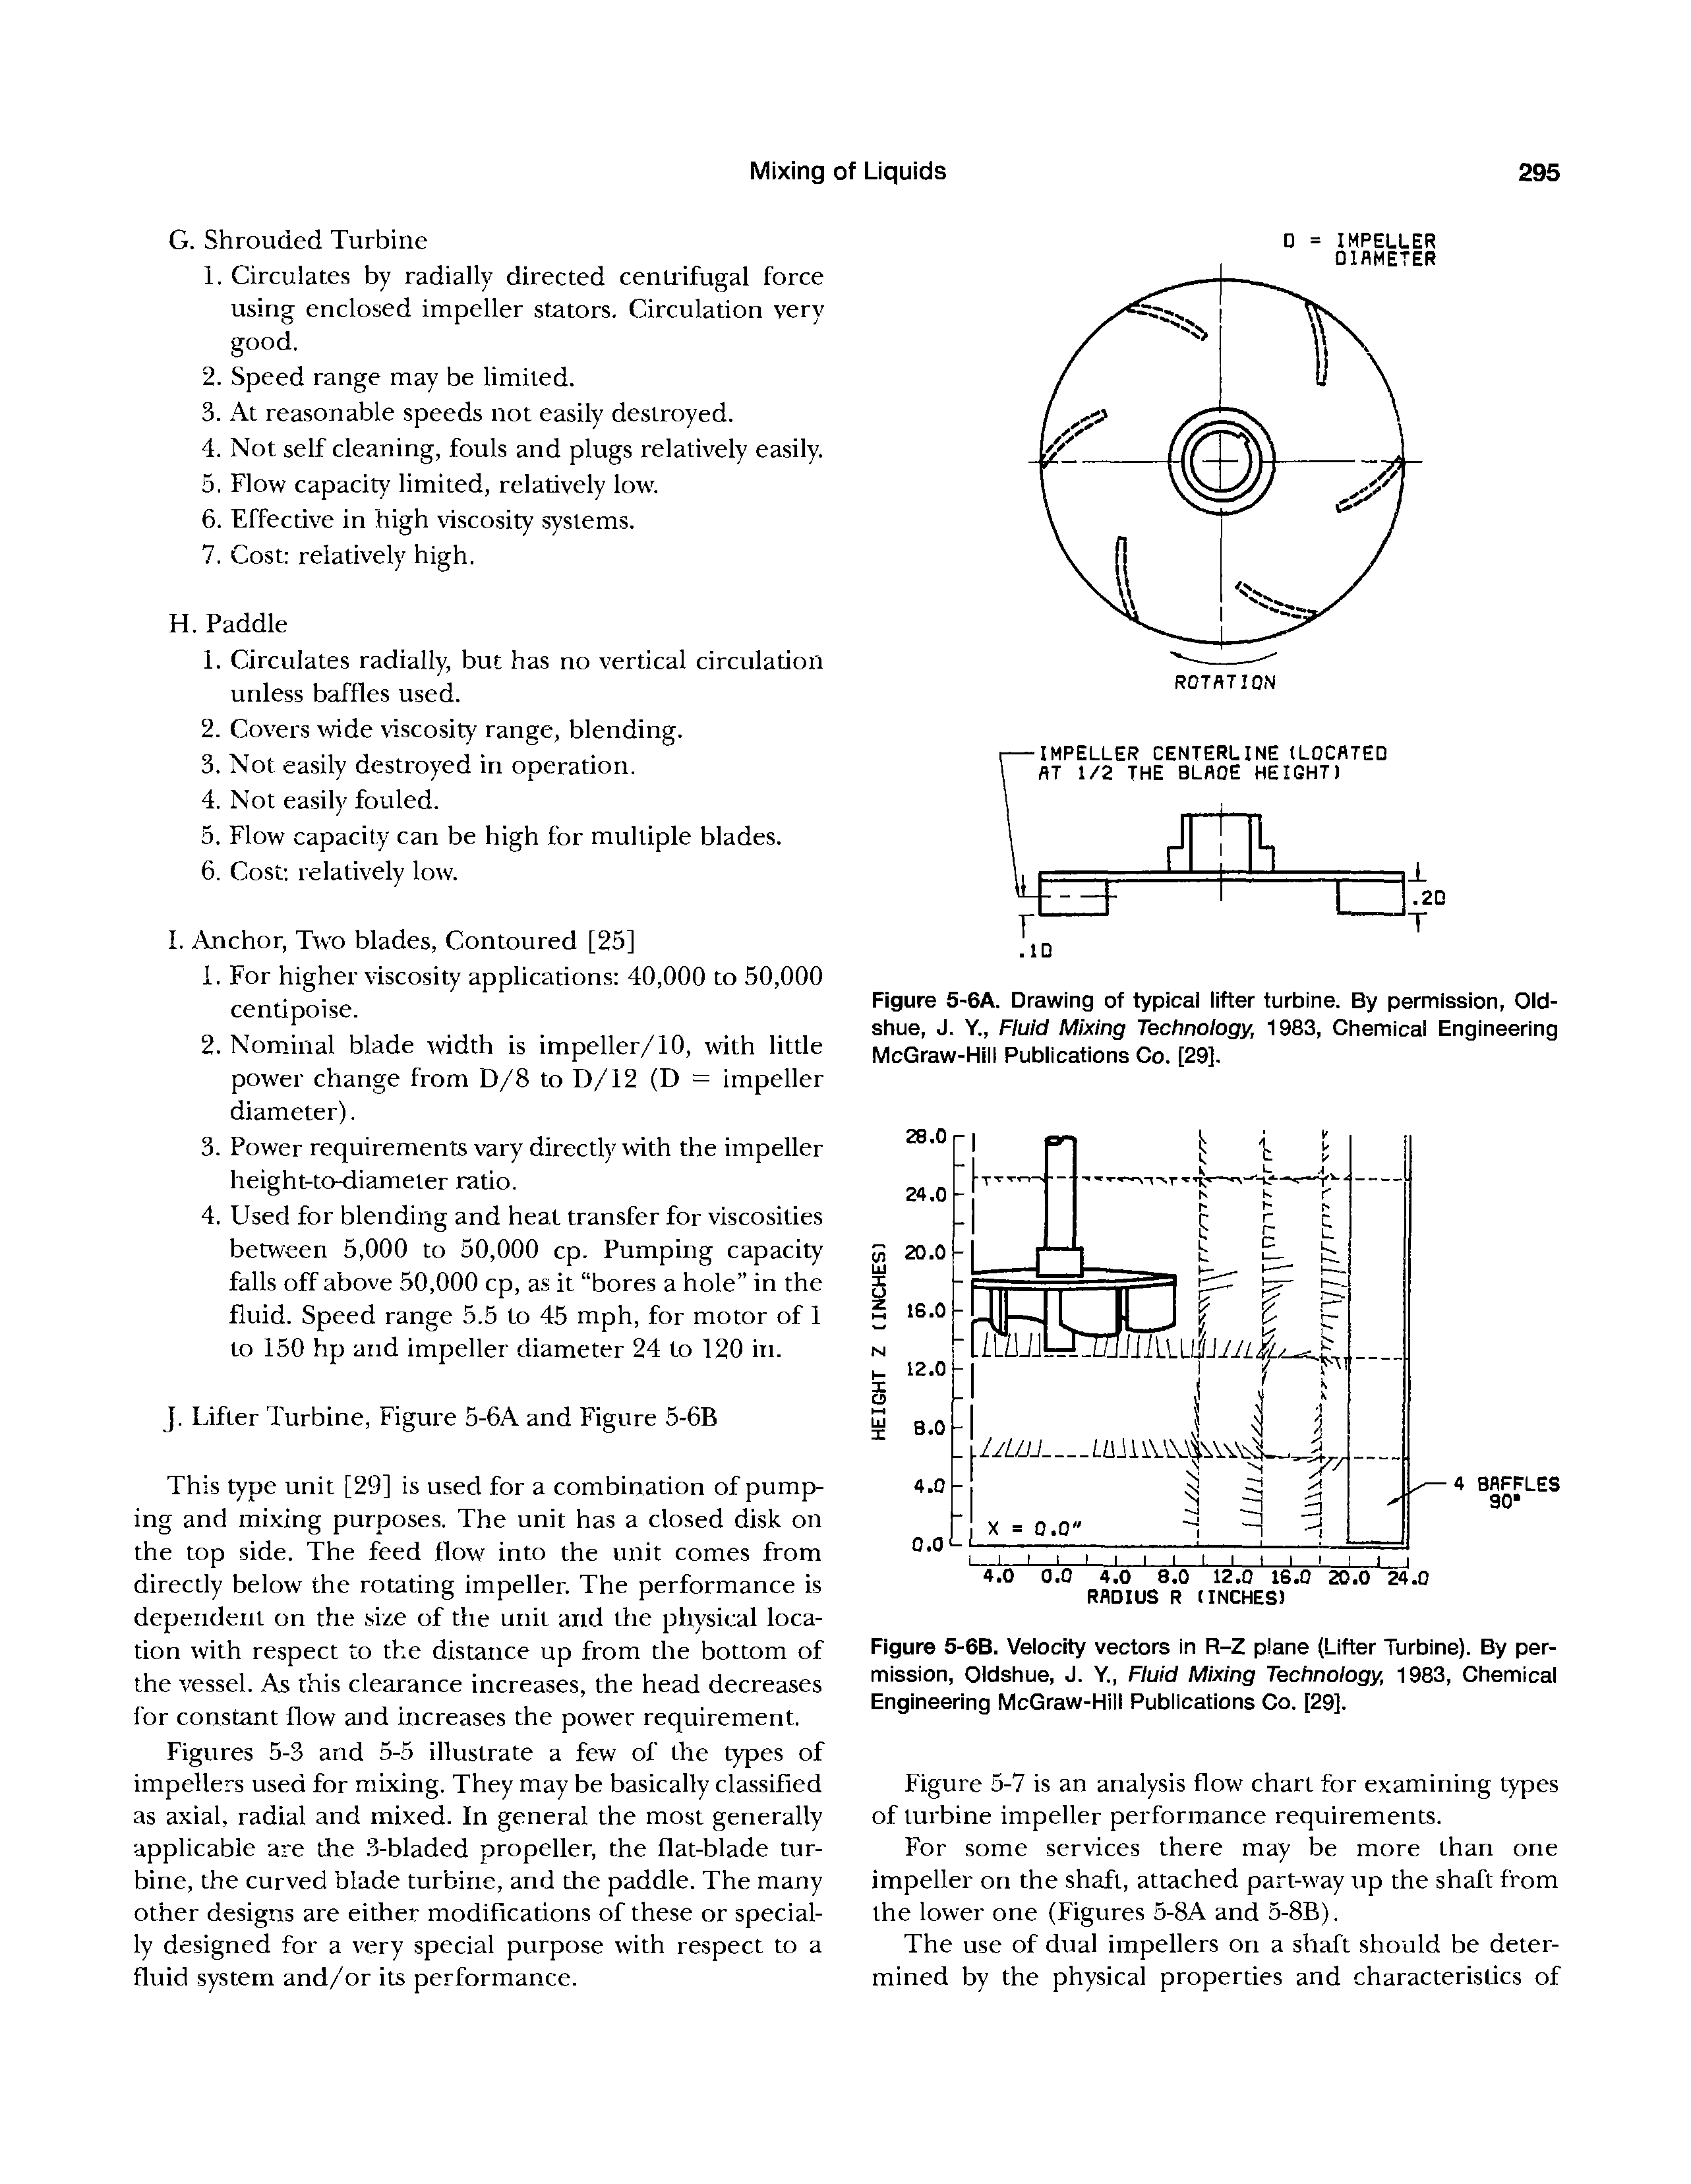 Figure 5-6A. Drawing of typicai lifter turbine. By permission, Old-shue, J. Y., Fluid Mixing Technology, 1983, Chemical Engineering McGraw-Hill Publications Co. [29],...